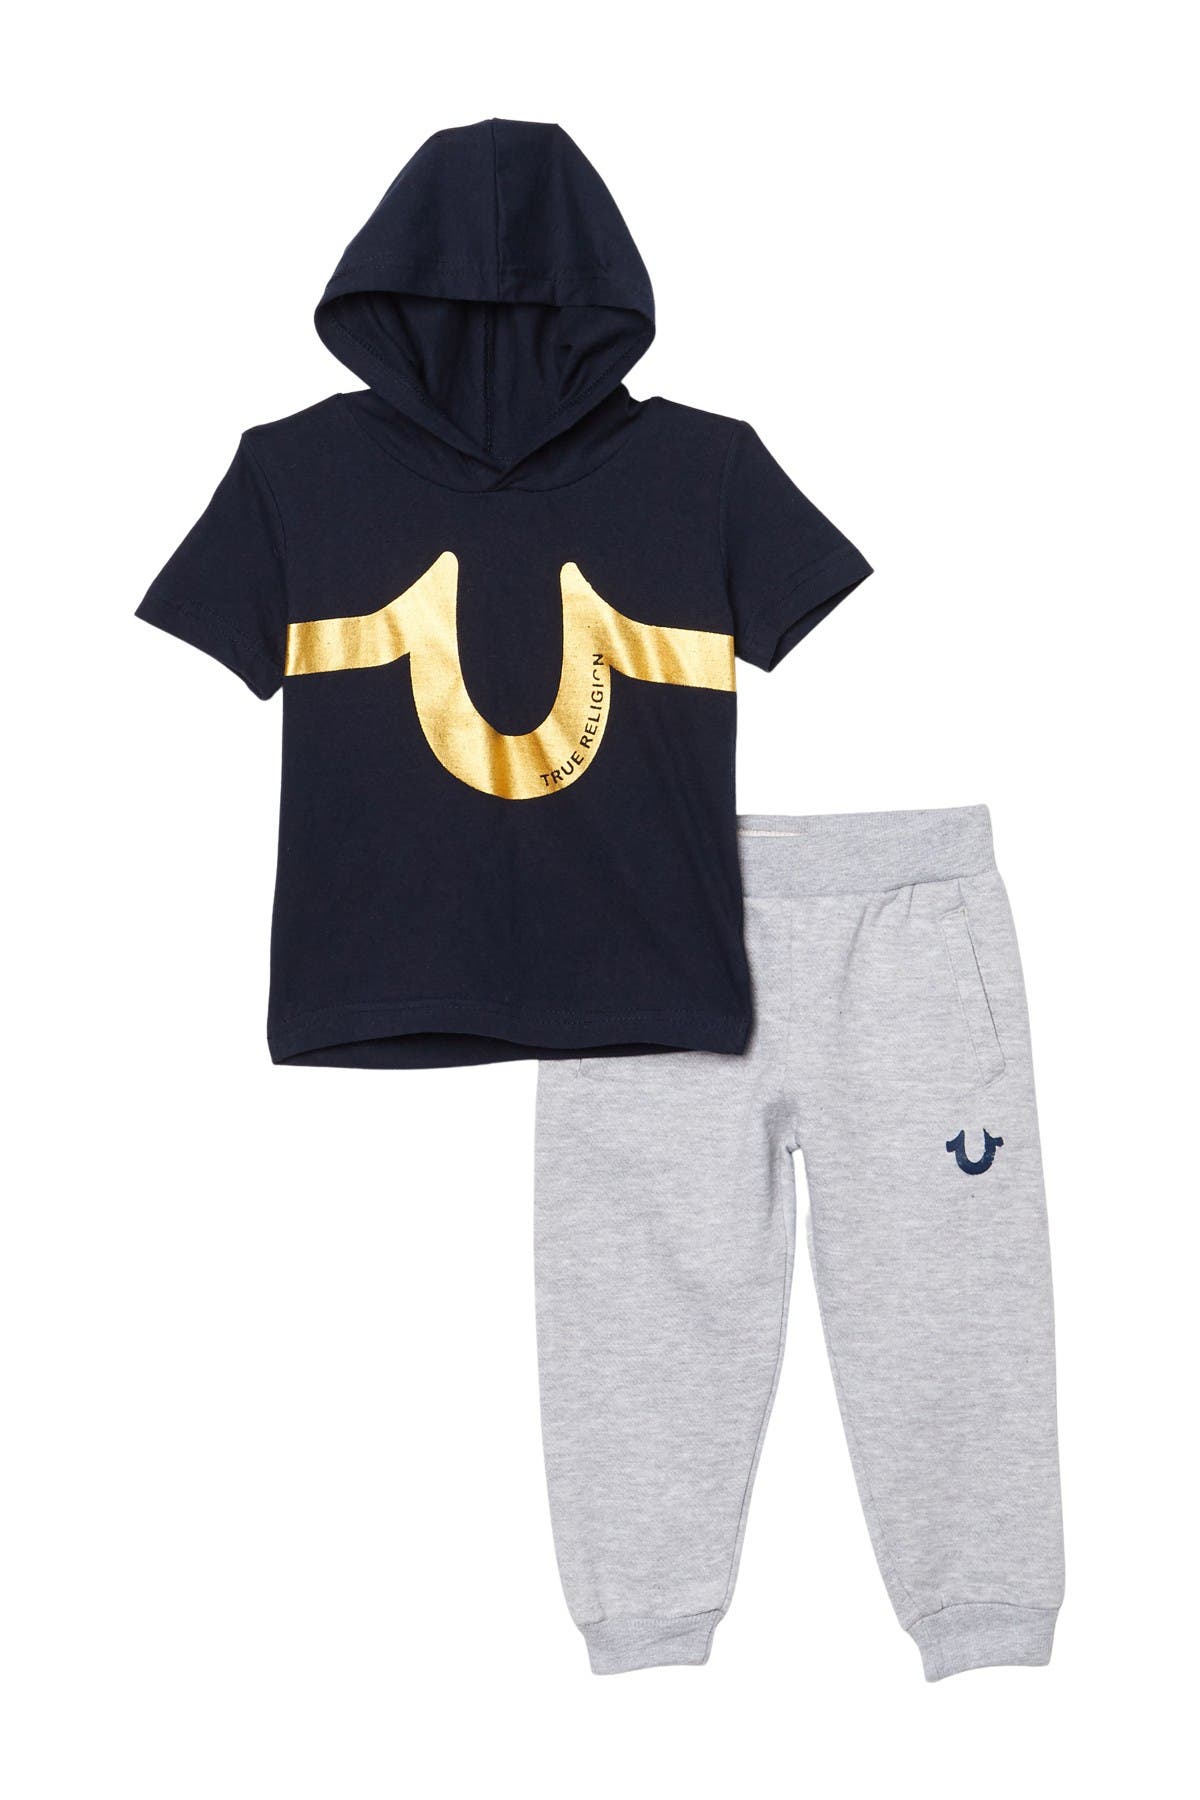 true religion baby outfits